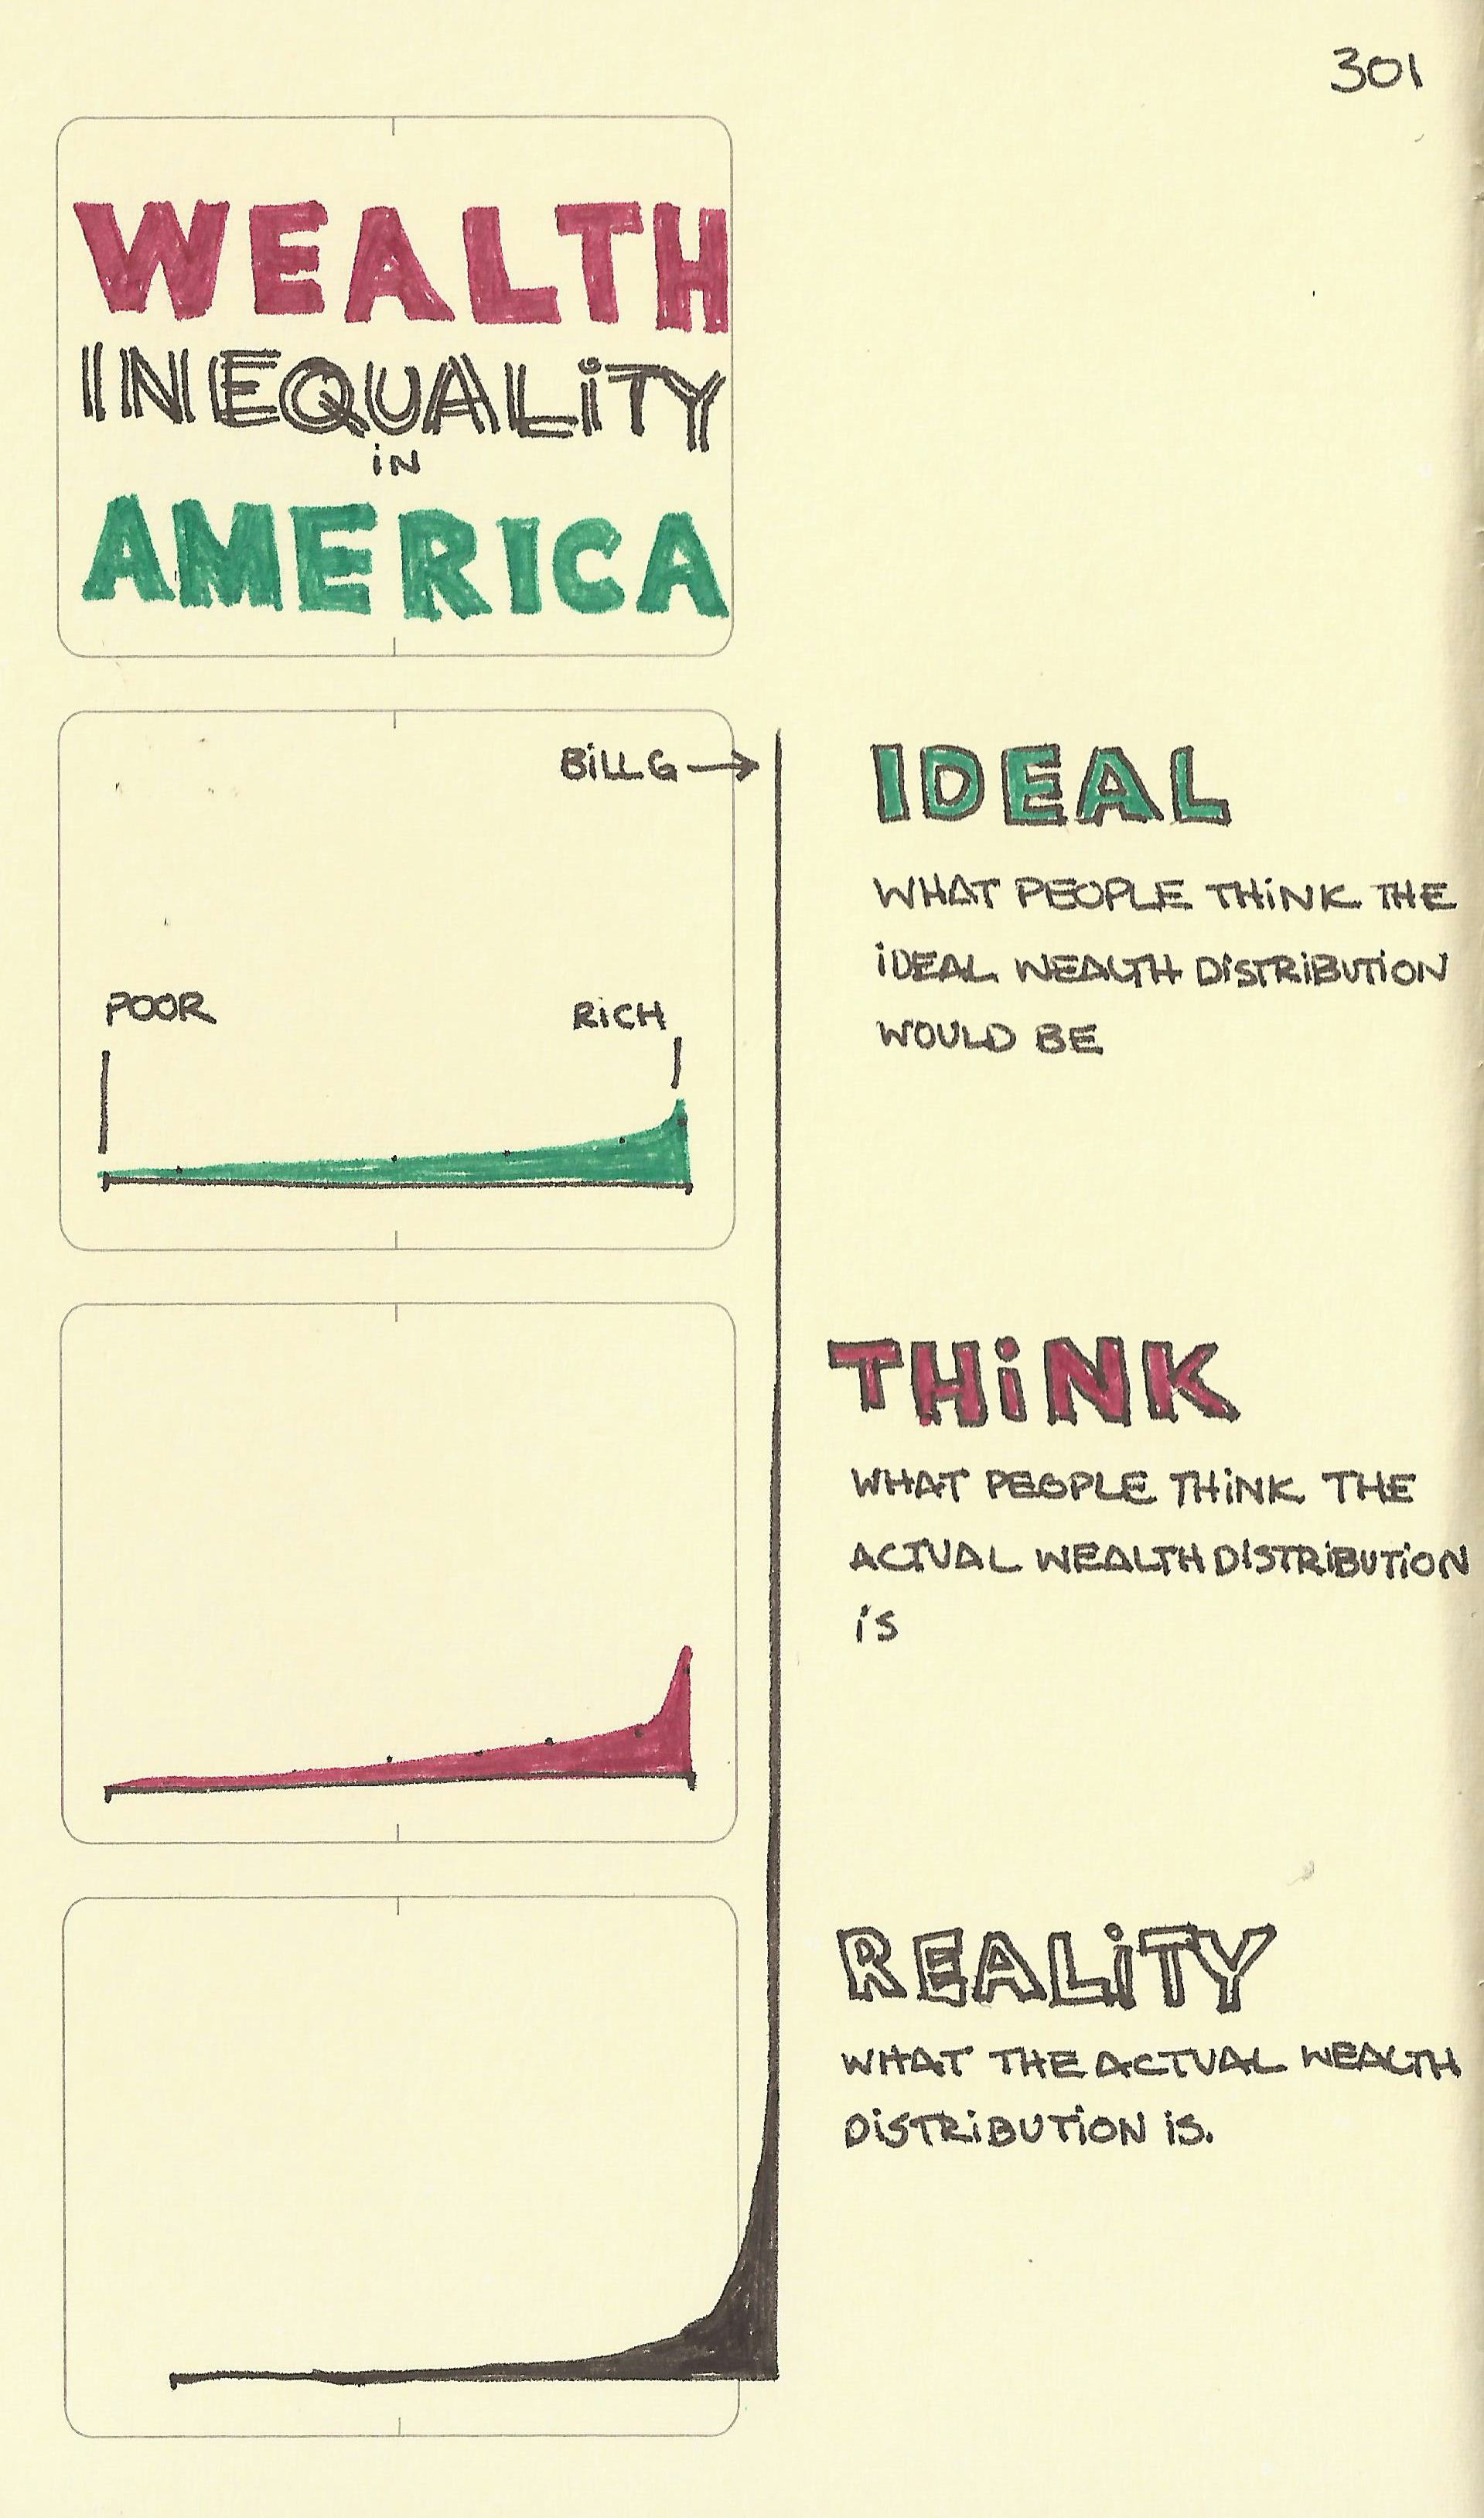 Wealth inequality in America - Sketchplanations